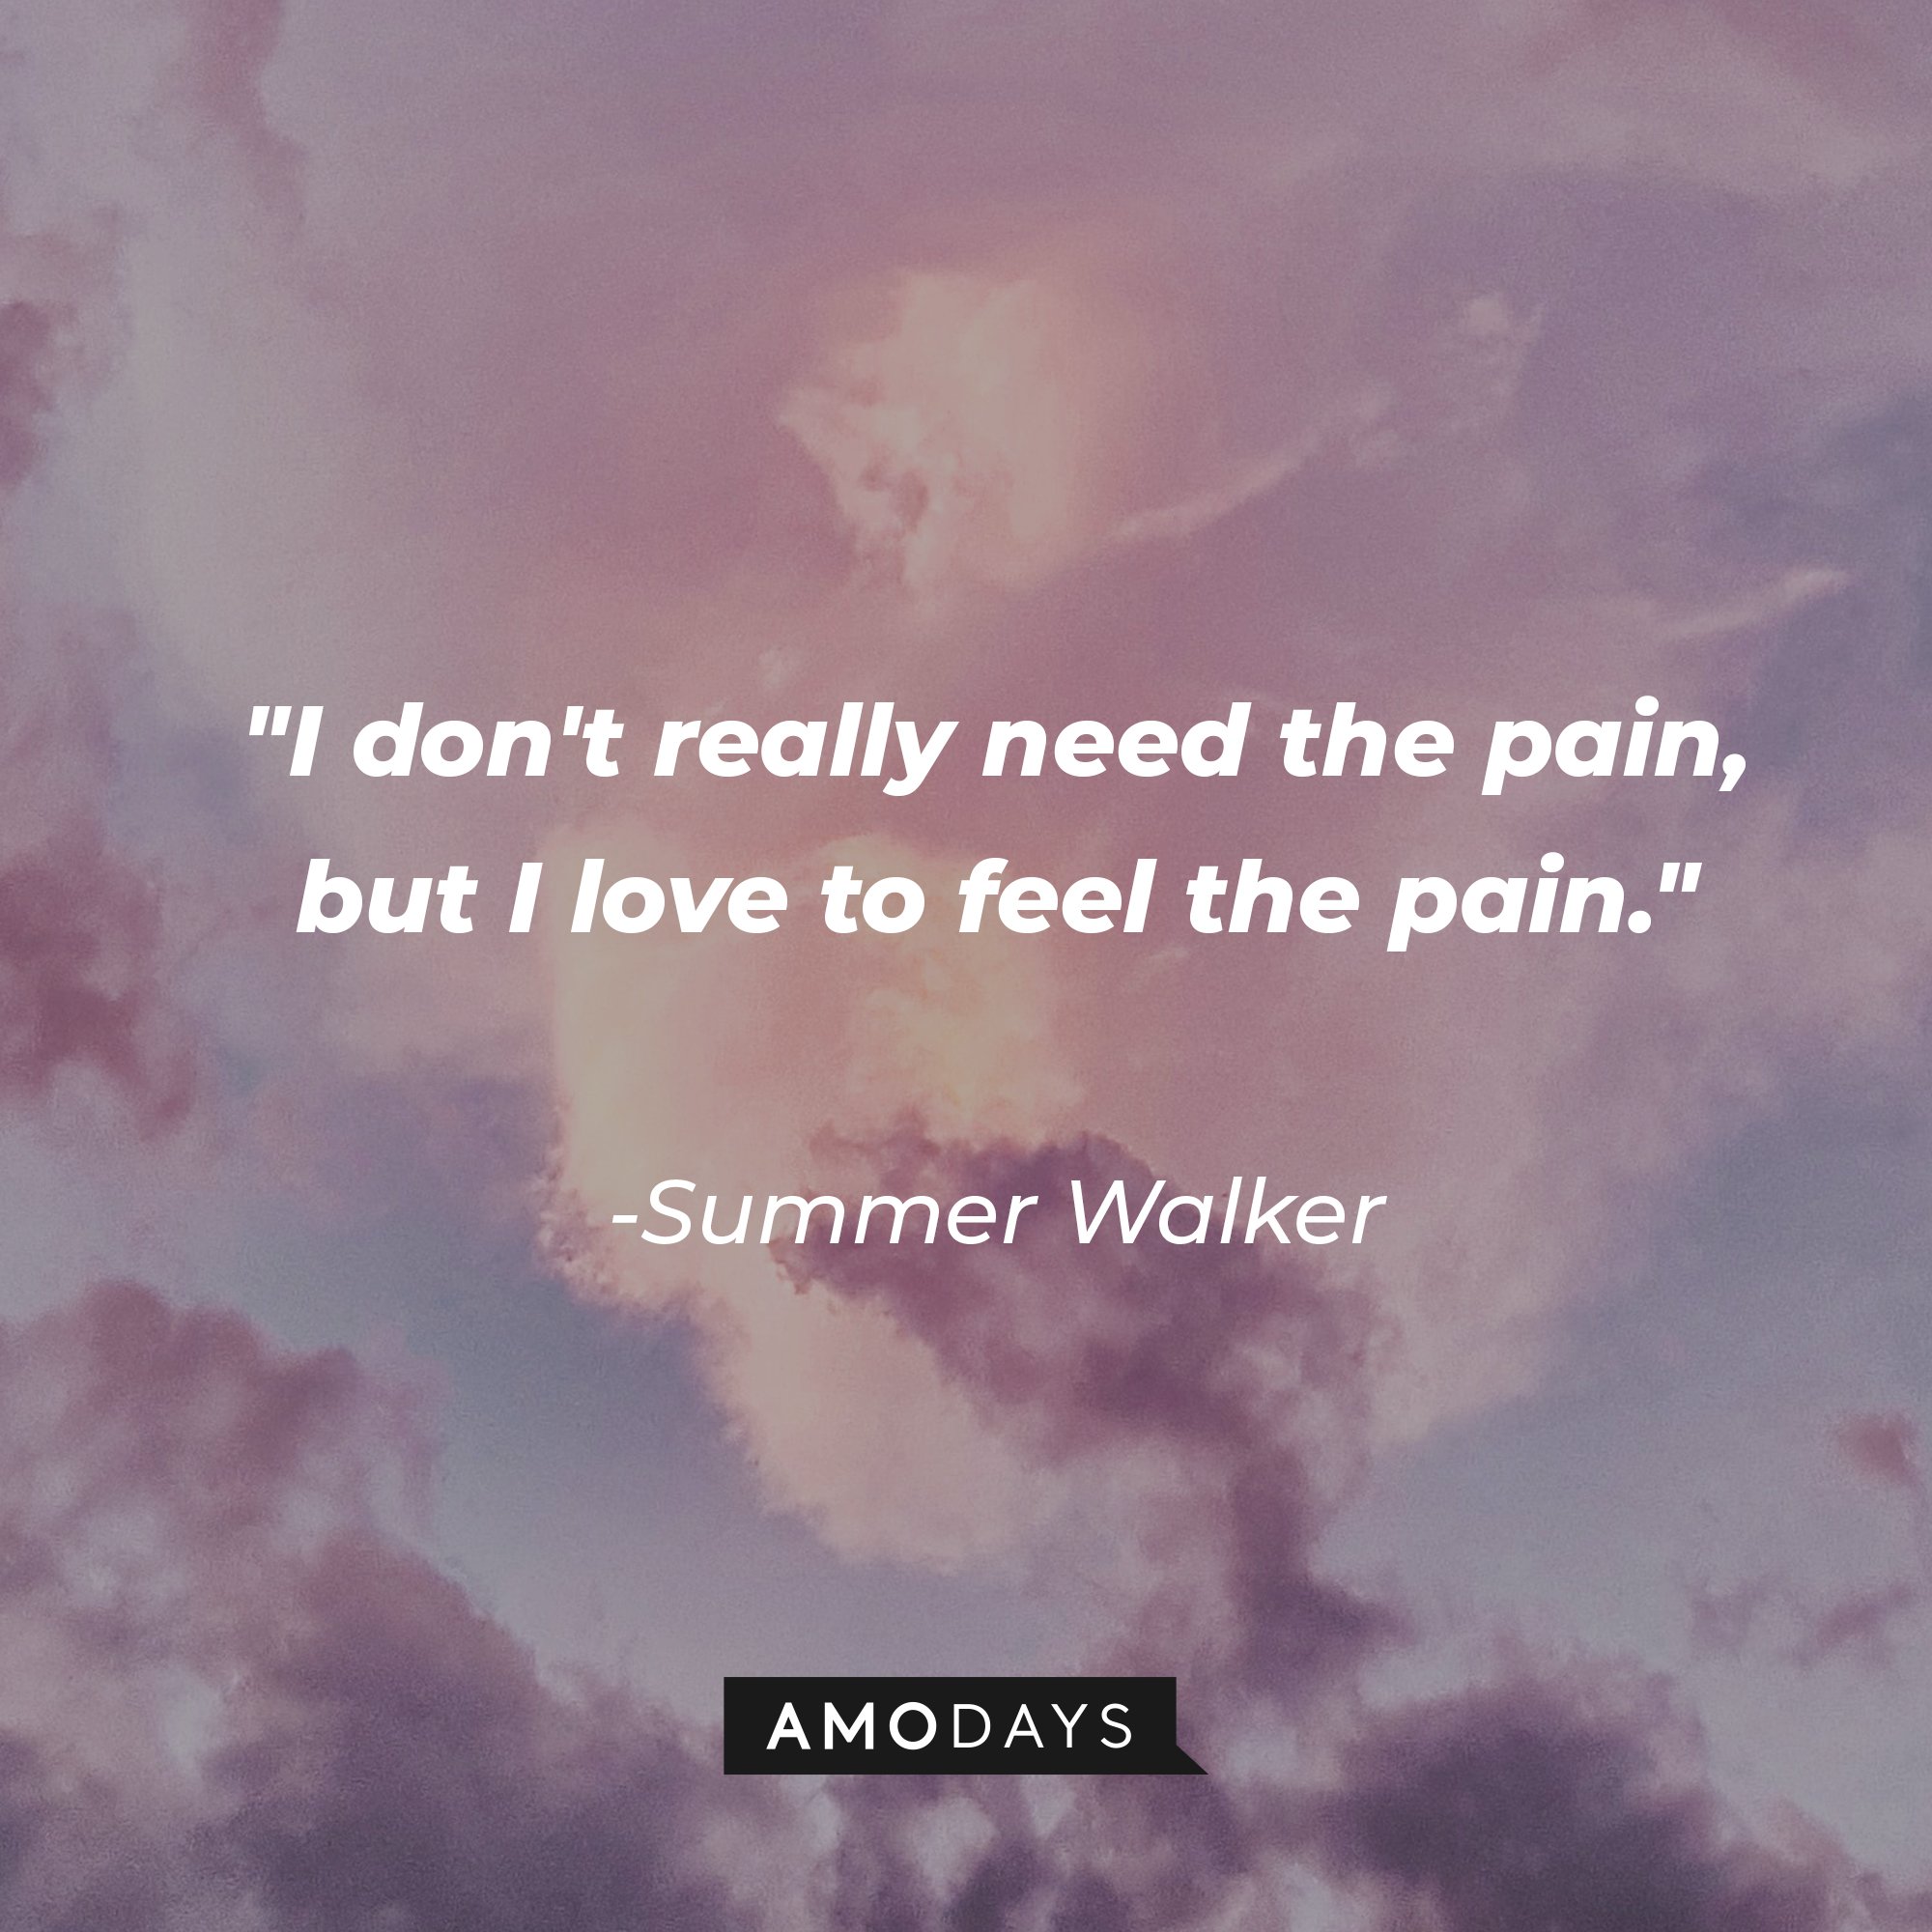 Summer Walker's quote: "I don't really need the pain, but I love to feel the pain." | Image: AmoDays